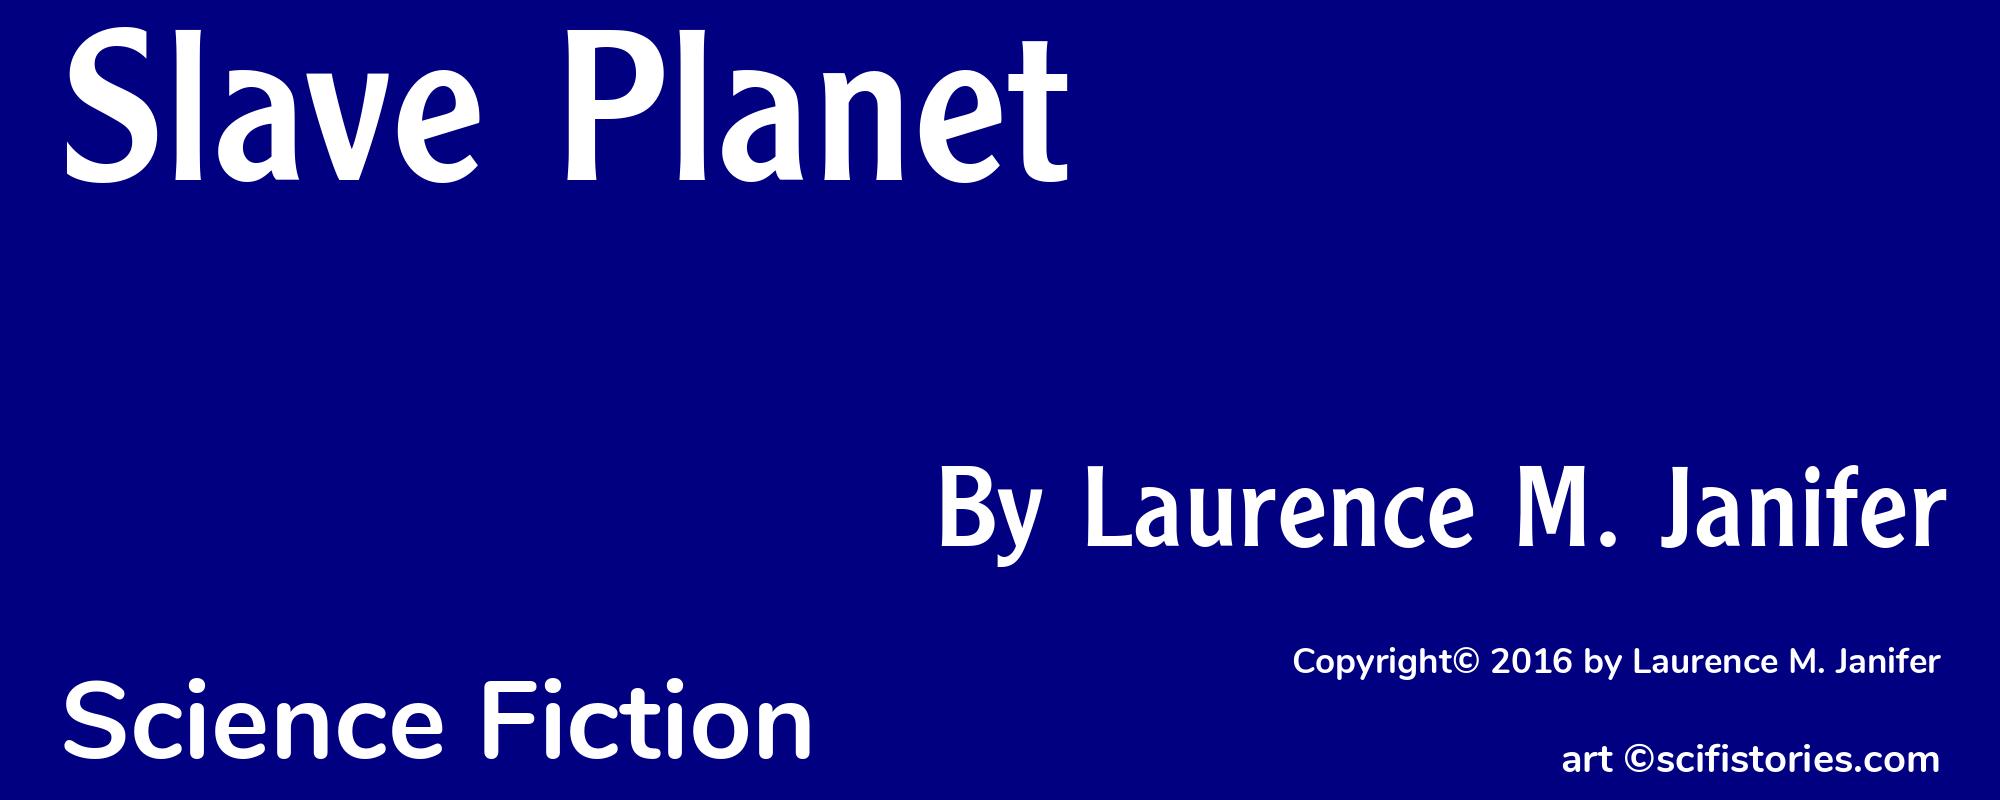 Slave Planet - Cover